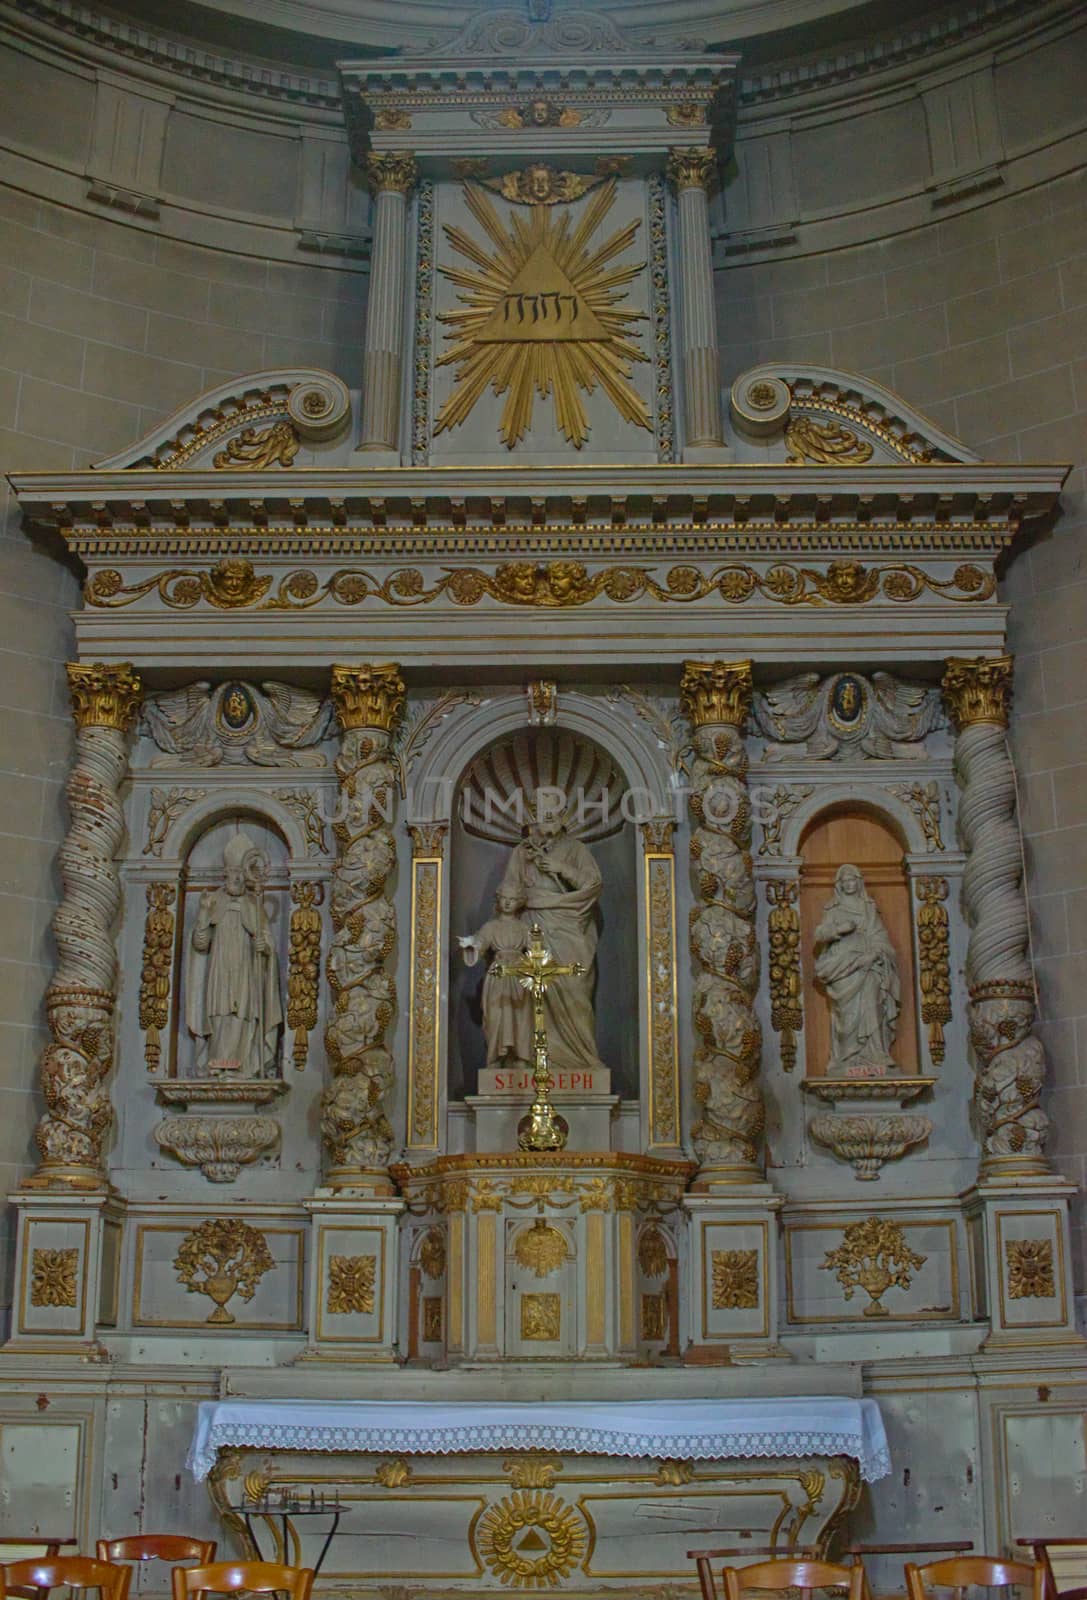 Altar with statues of saints in Catholic cathedral at Avranches, France